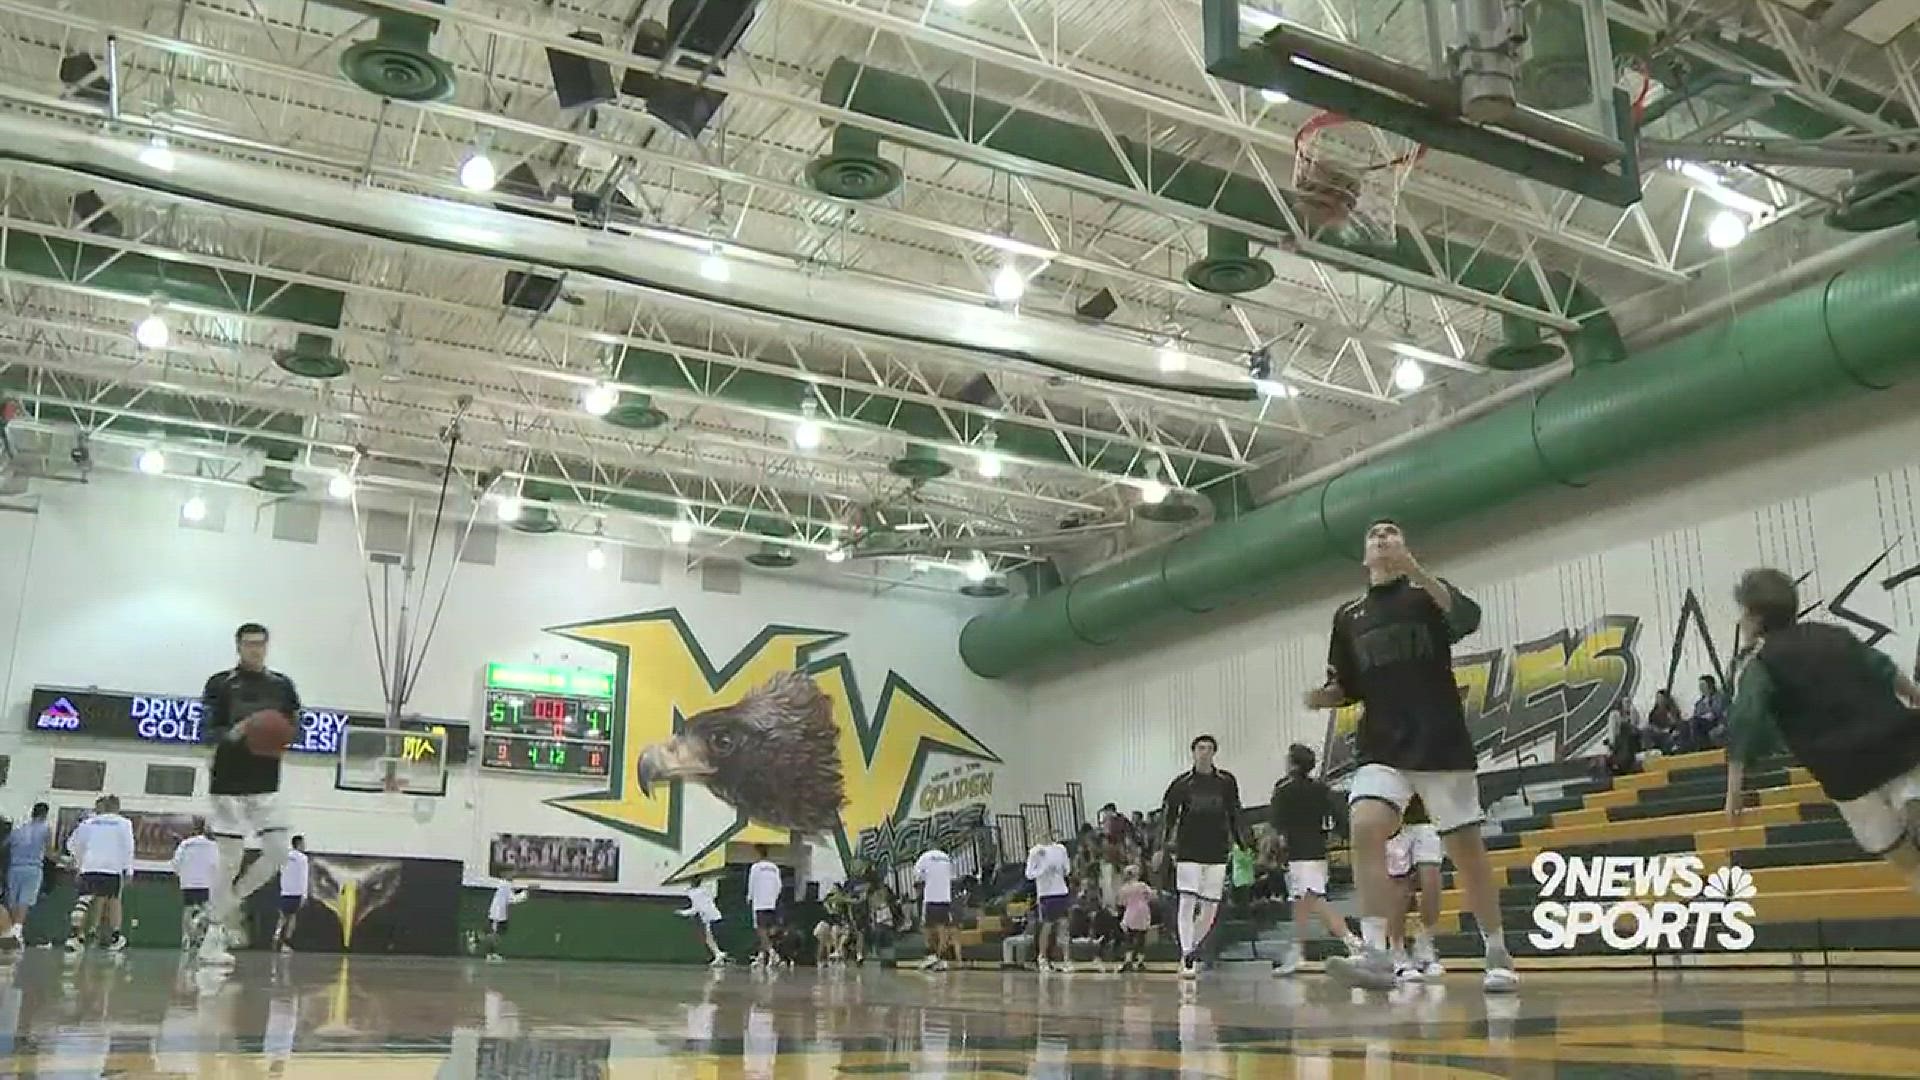 Extended highlights from the Mountain Vista vs. Greeley West boys' basketball game on 1/5/19.